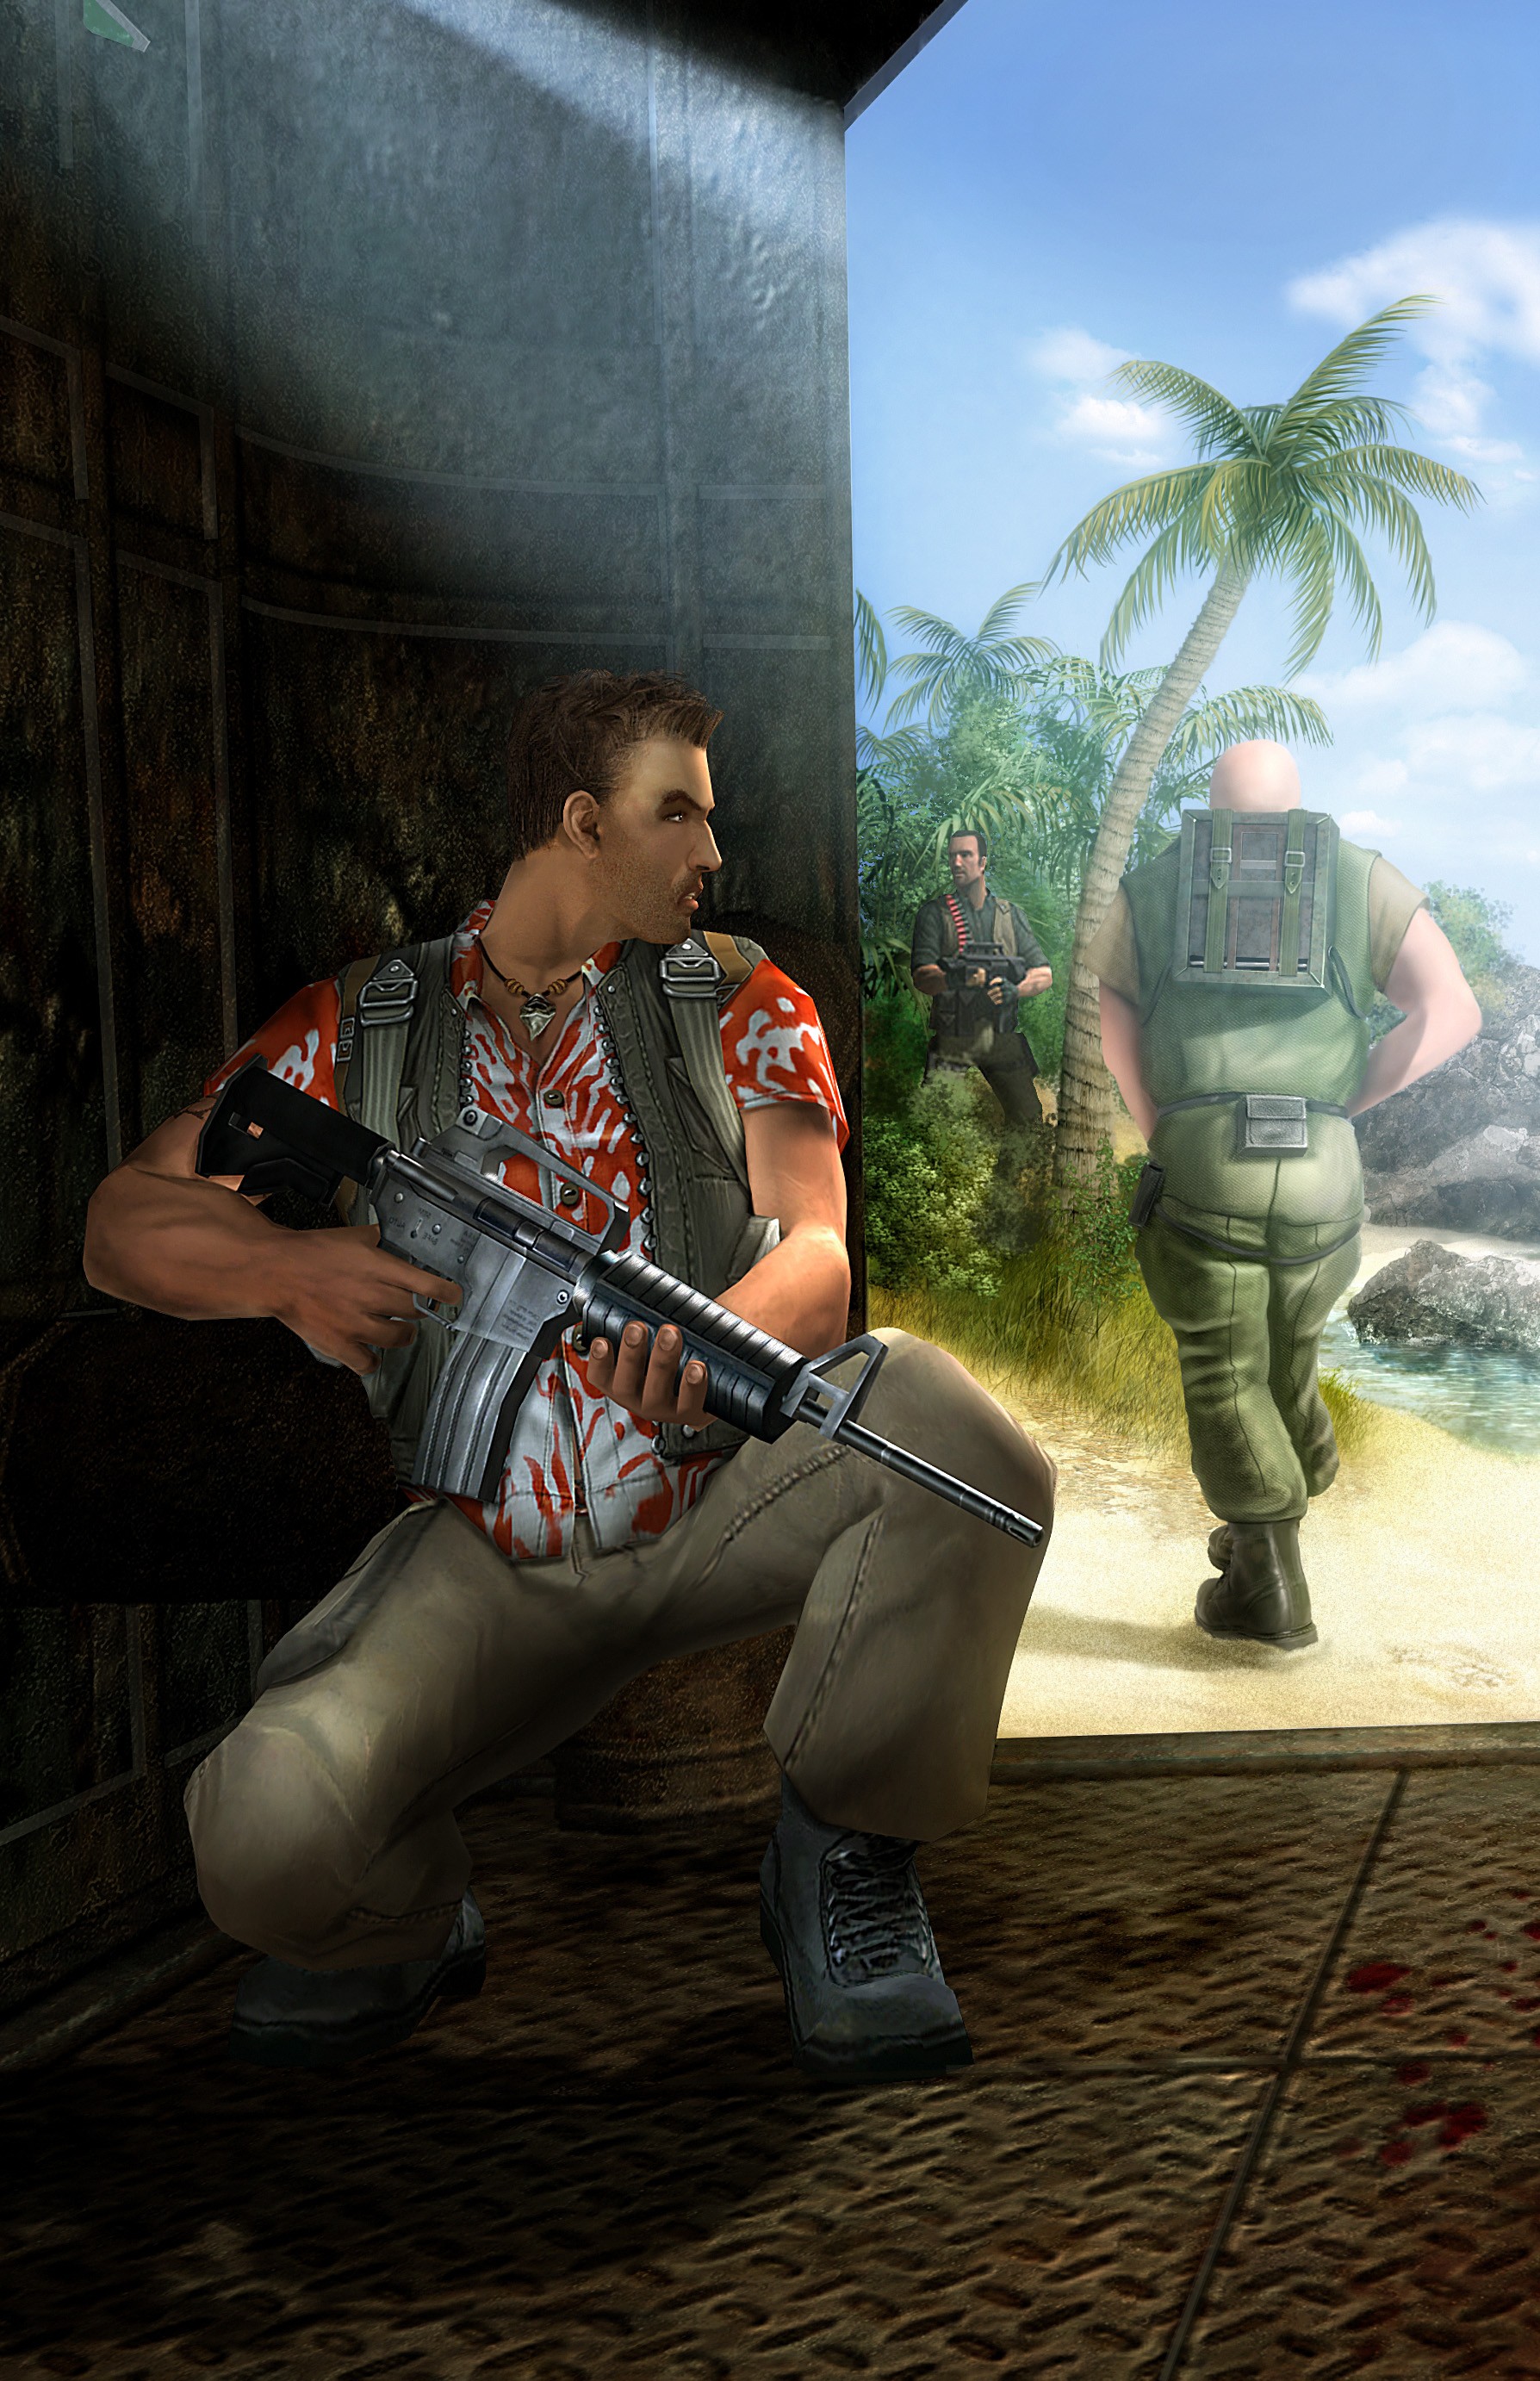 The 10 Best Far Cry Games